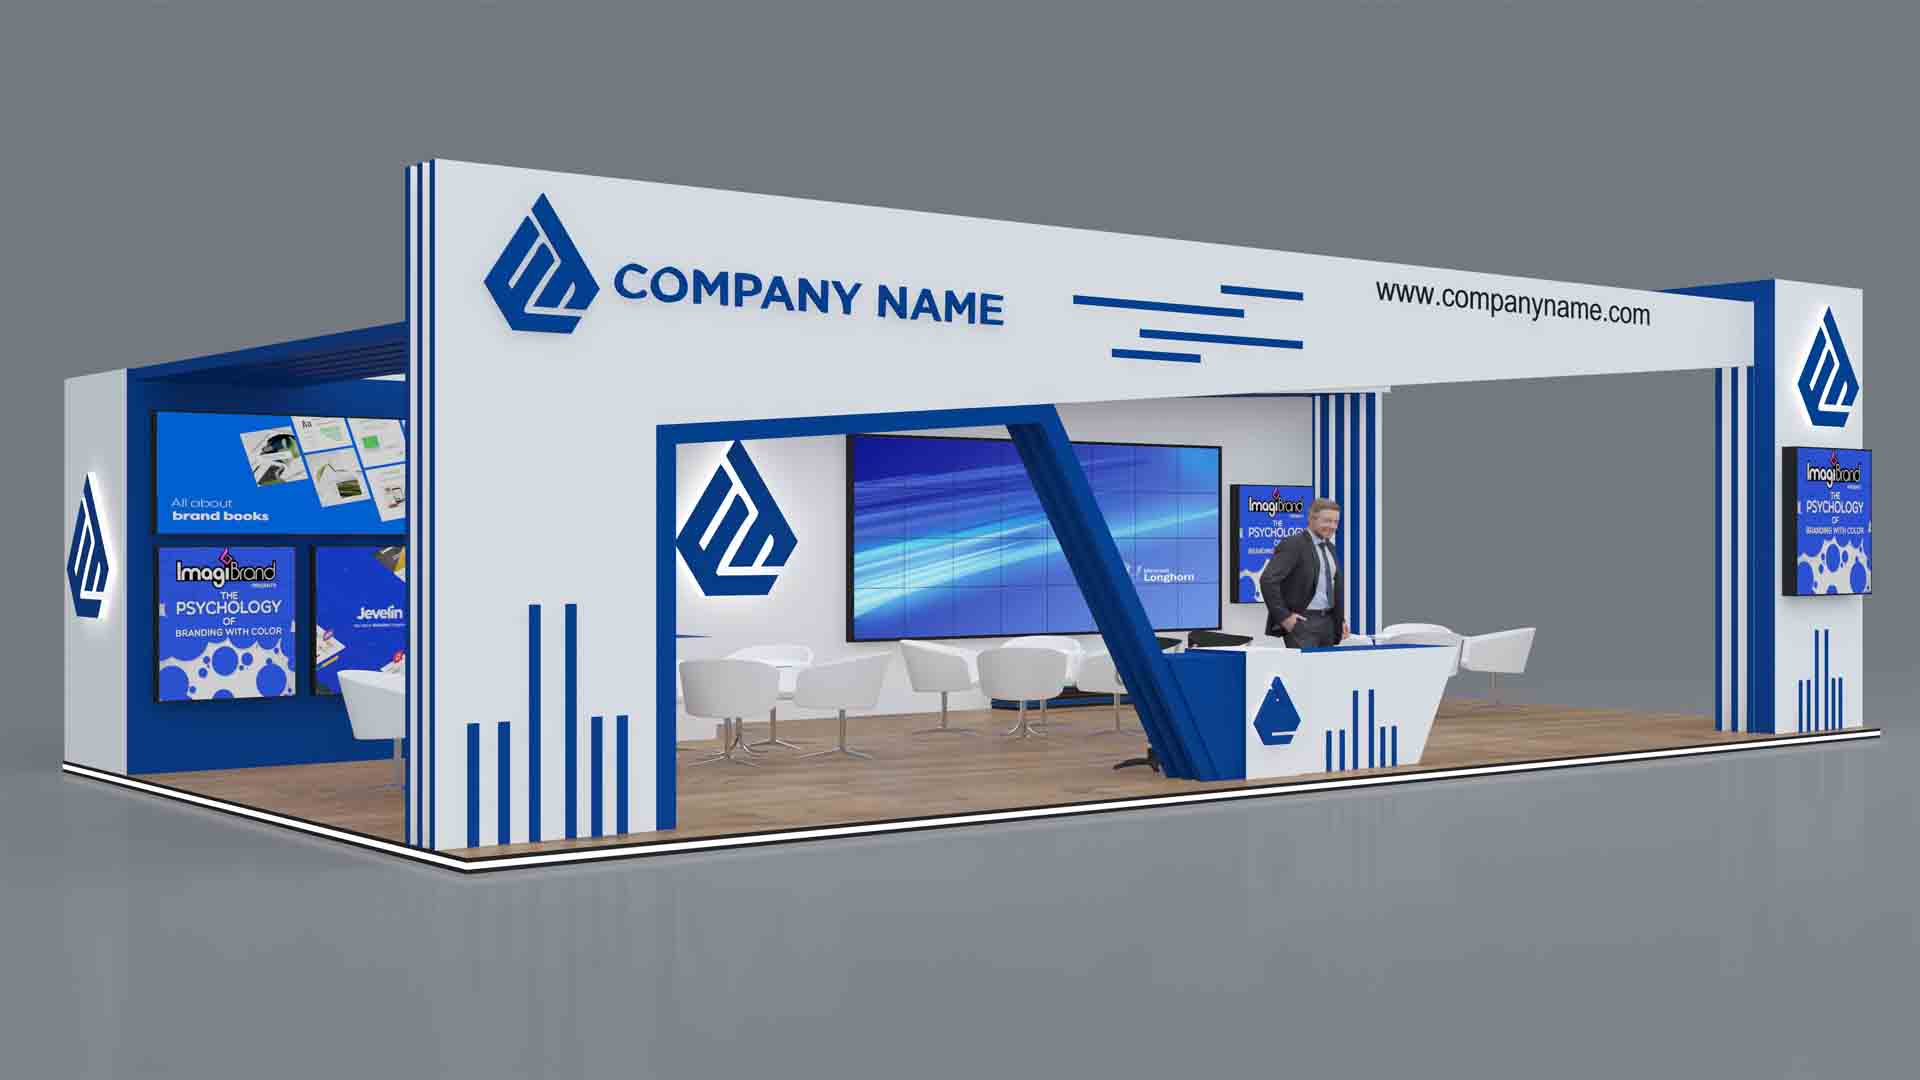 How to find booth design for food company